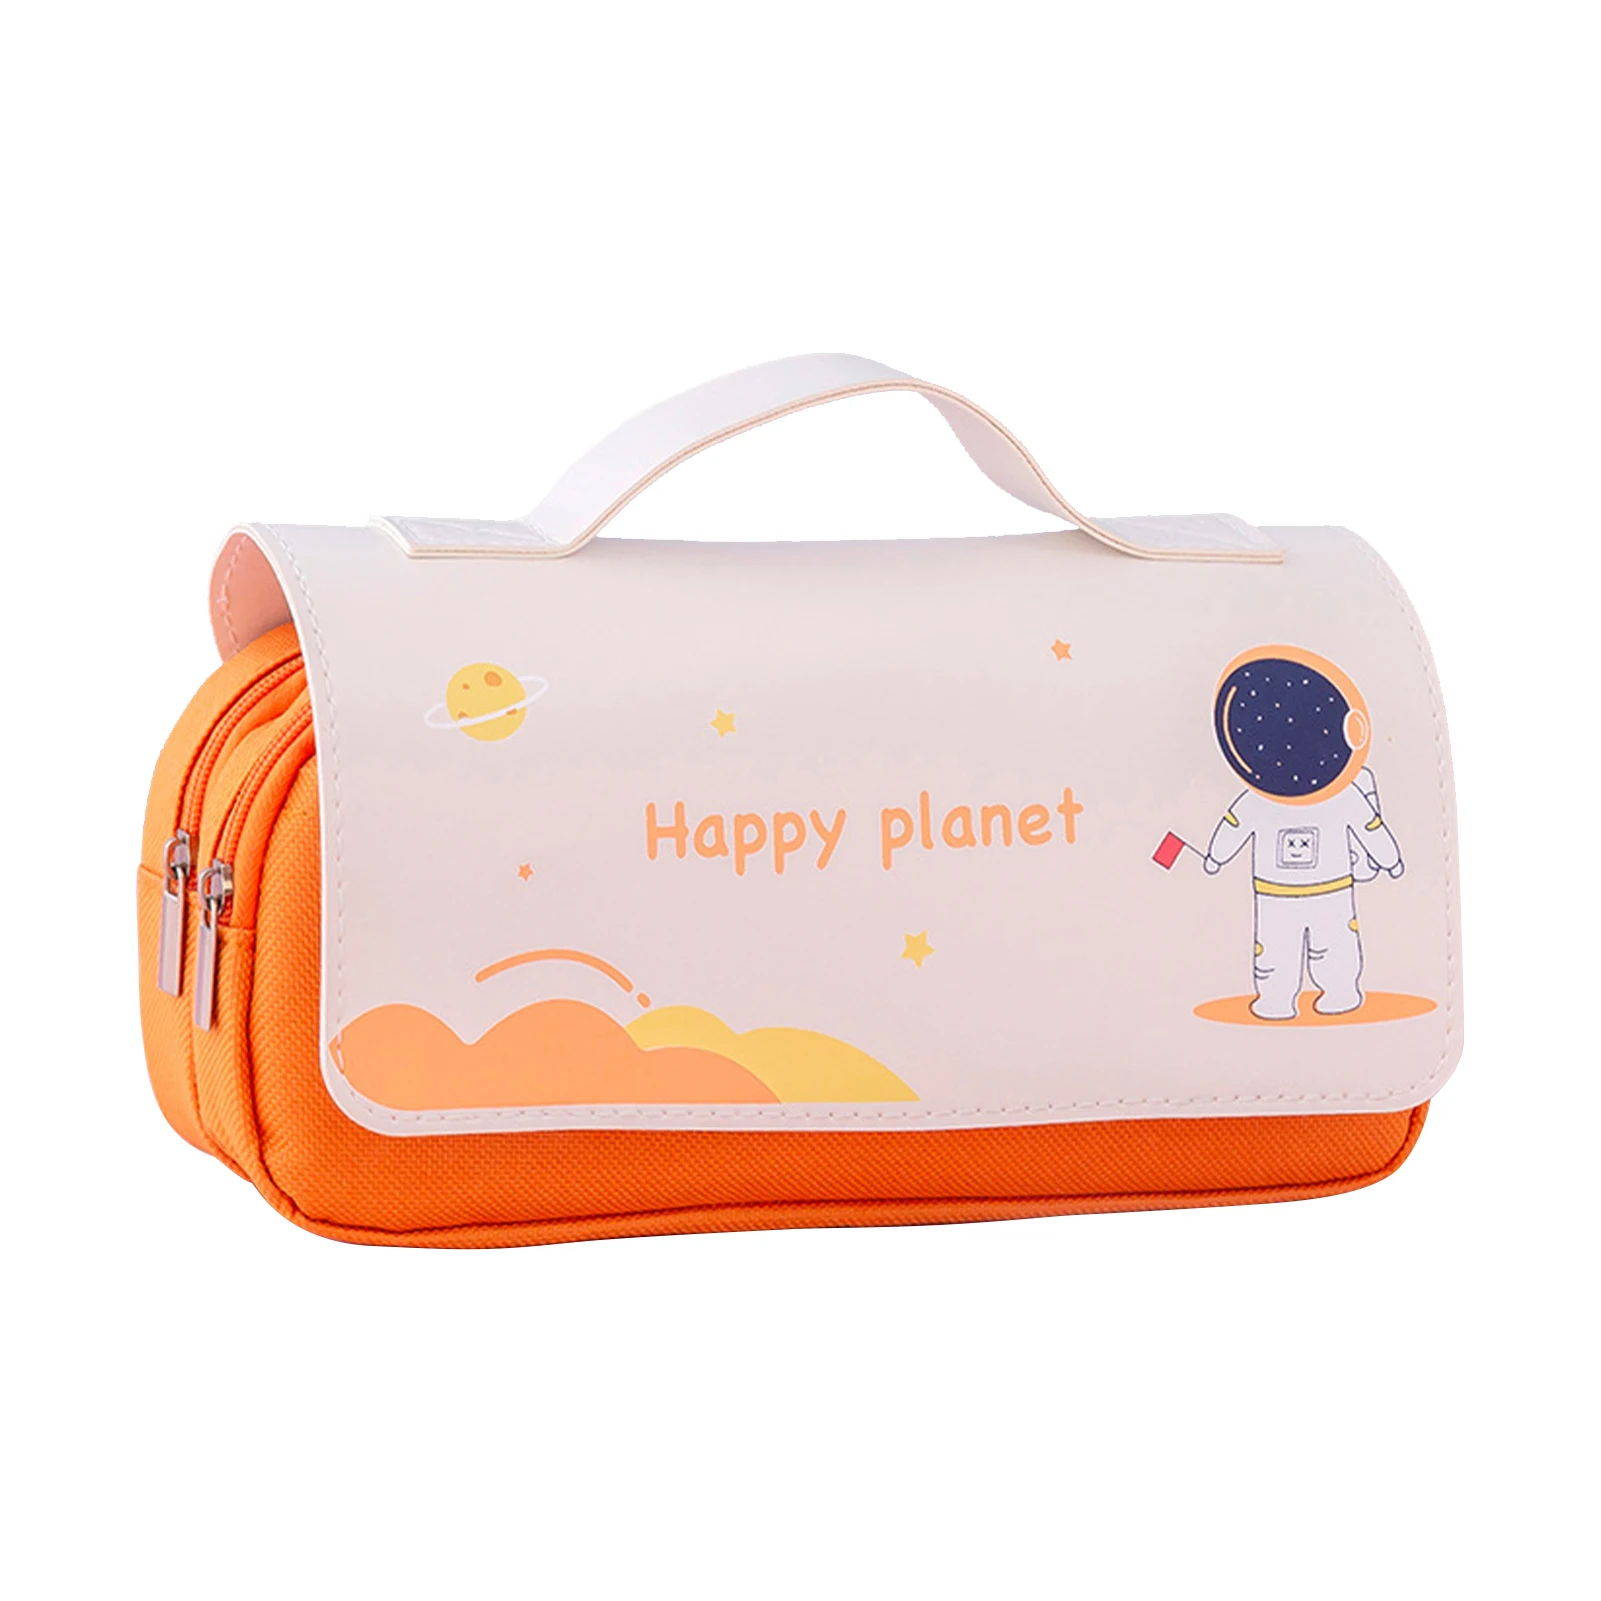 

Astronaut Planet Boy Girl Pencil Case Student School Large Capacity 3 Compartment Waterproof Cover For Kids Cute Cartoon Durable